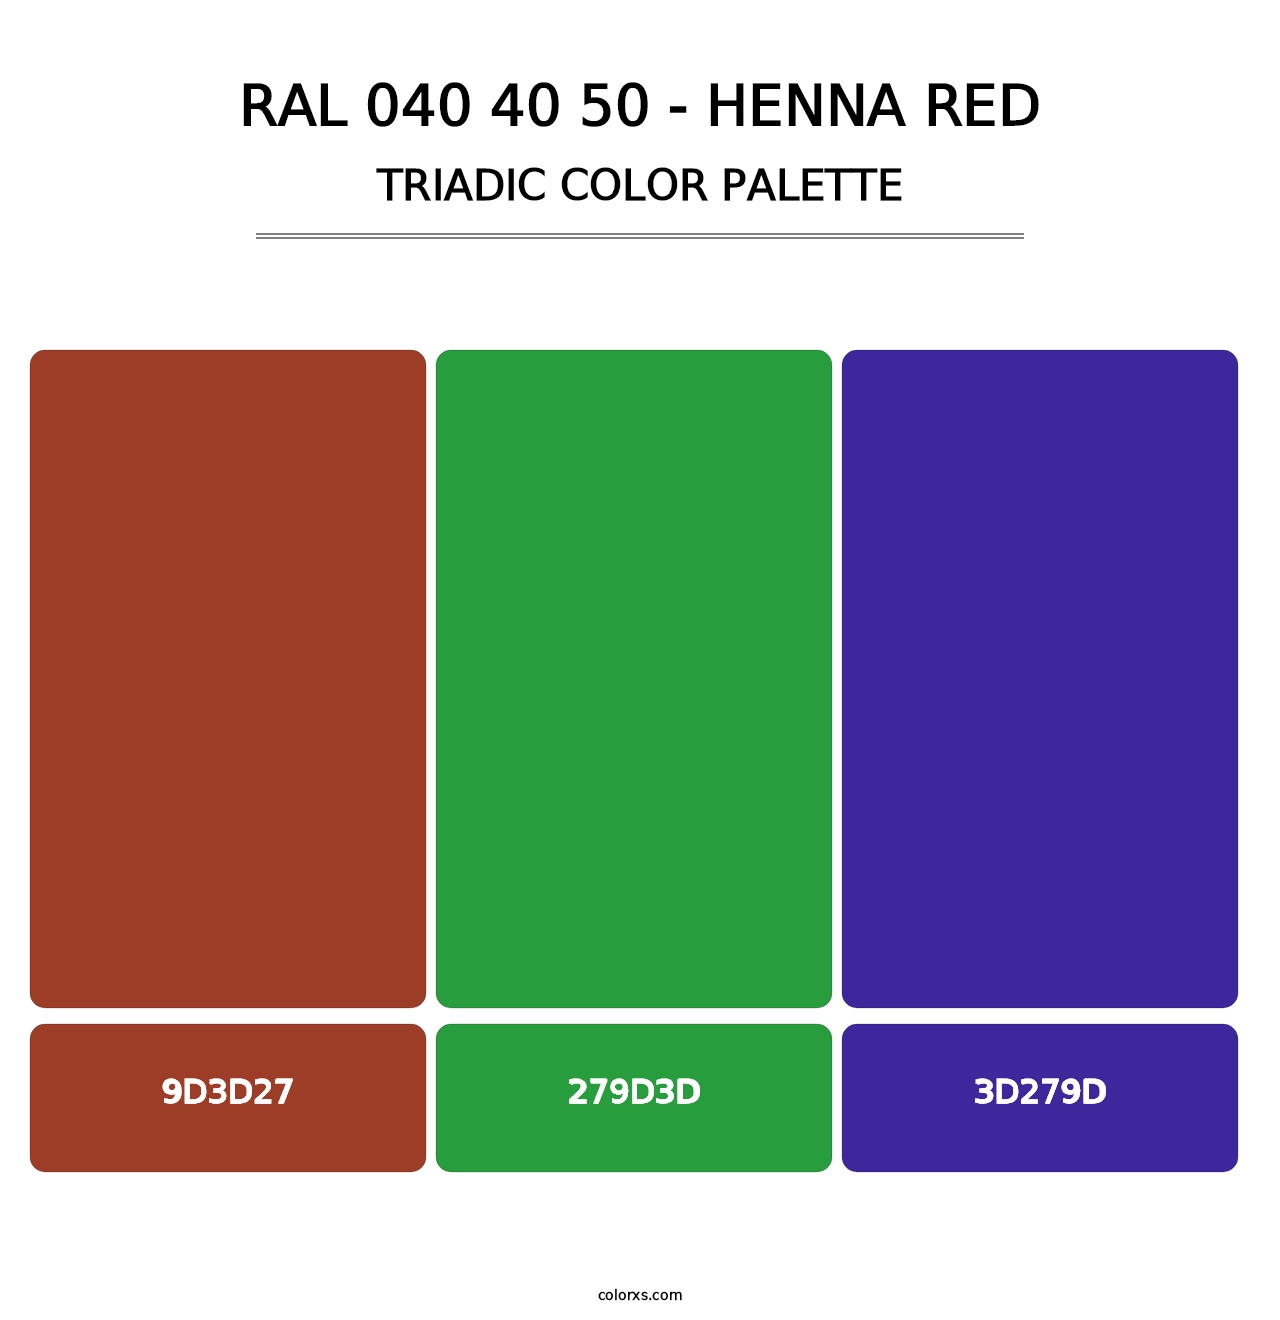 RAL 040 40 50 - Henna Red - Triadic Color Palette